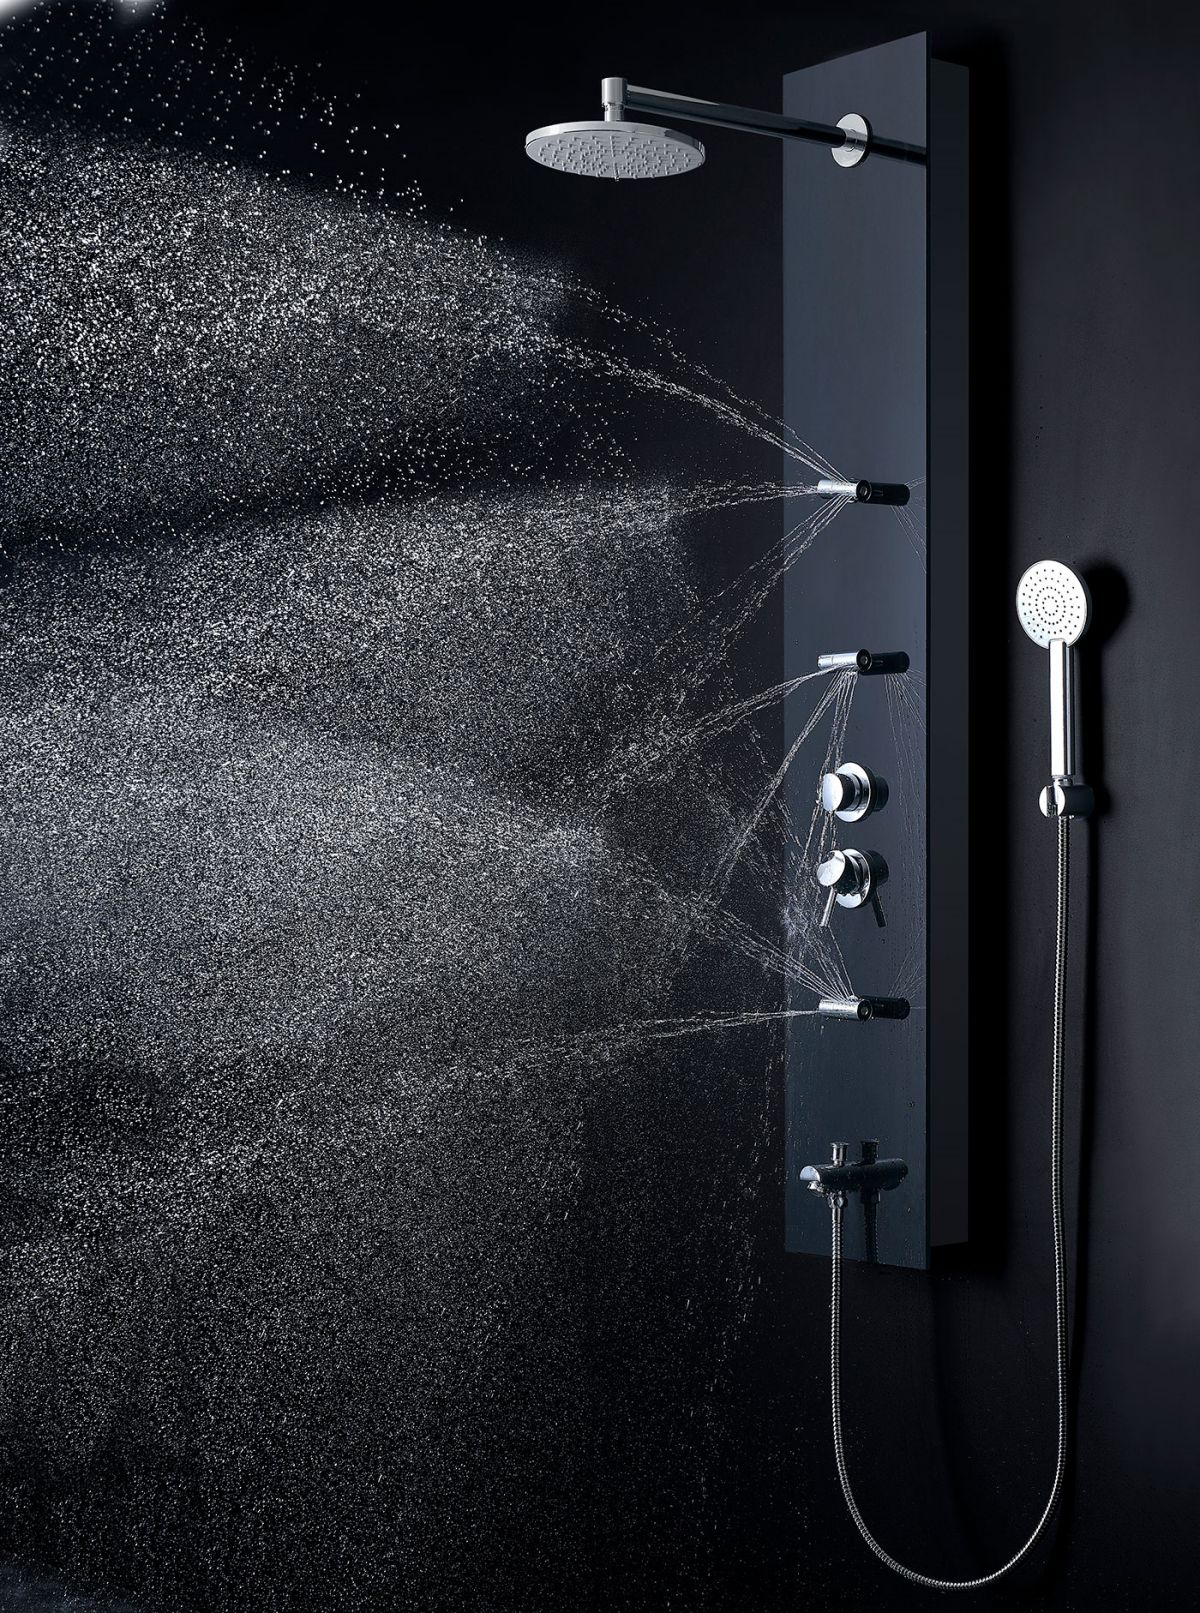 Best mixer shower 2022: Find the top shower for your bathroom from £90 | Expert Reviews